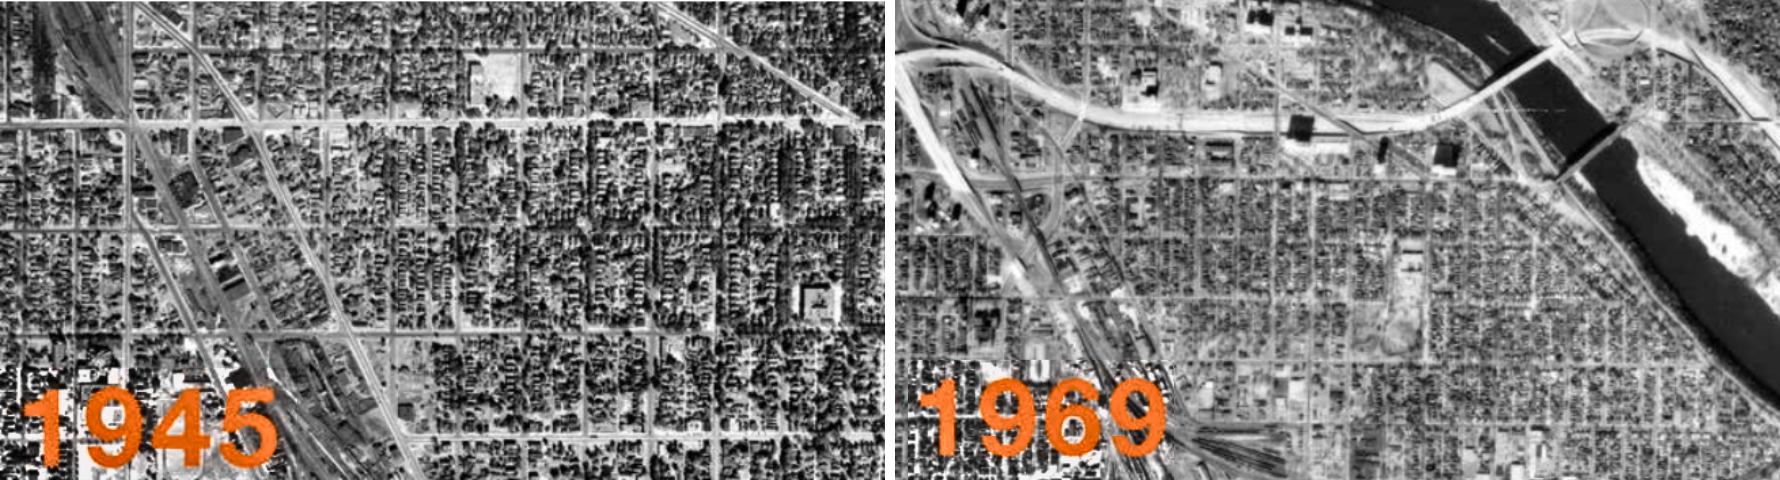 Two aerial photos of the Seward neighborhood before and after highway construction